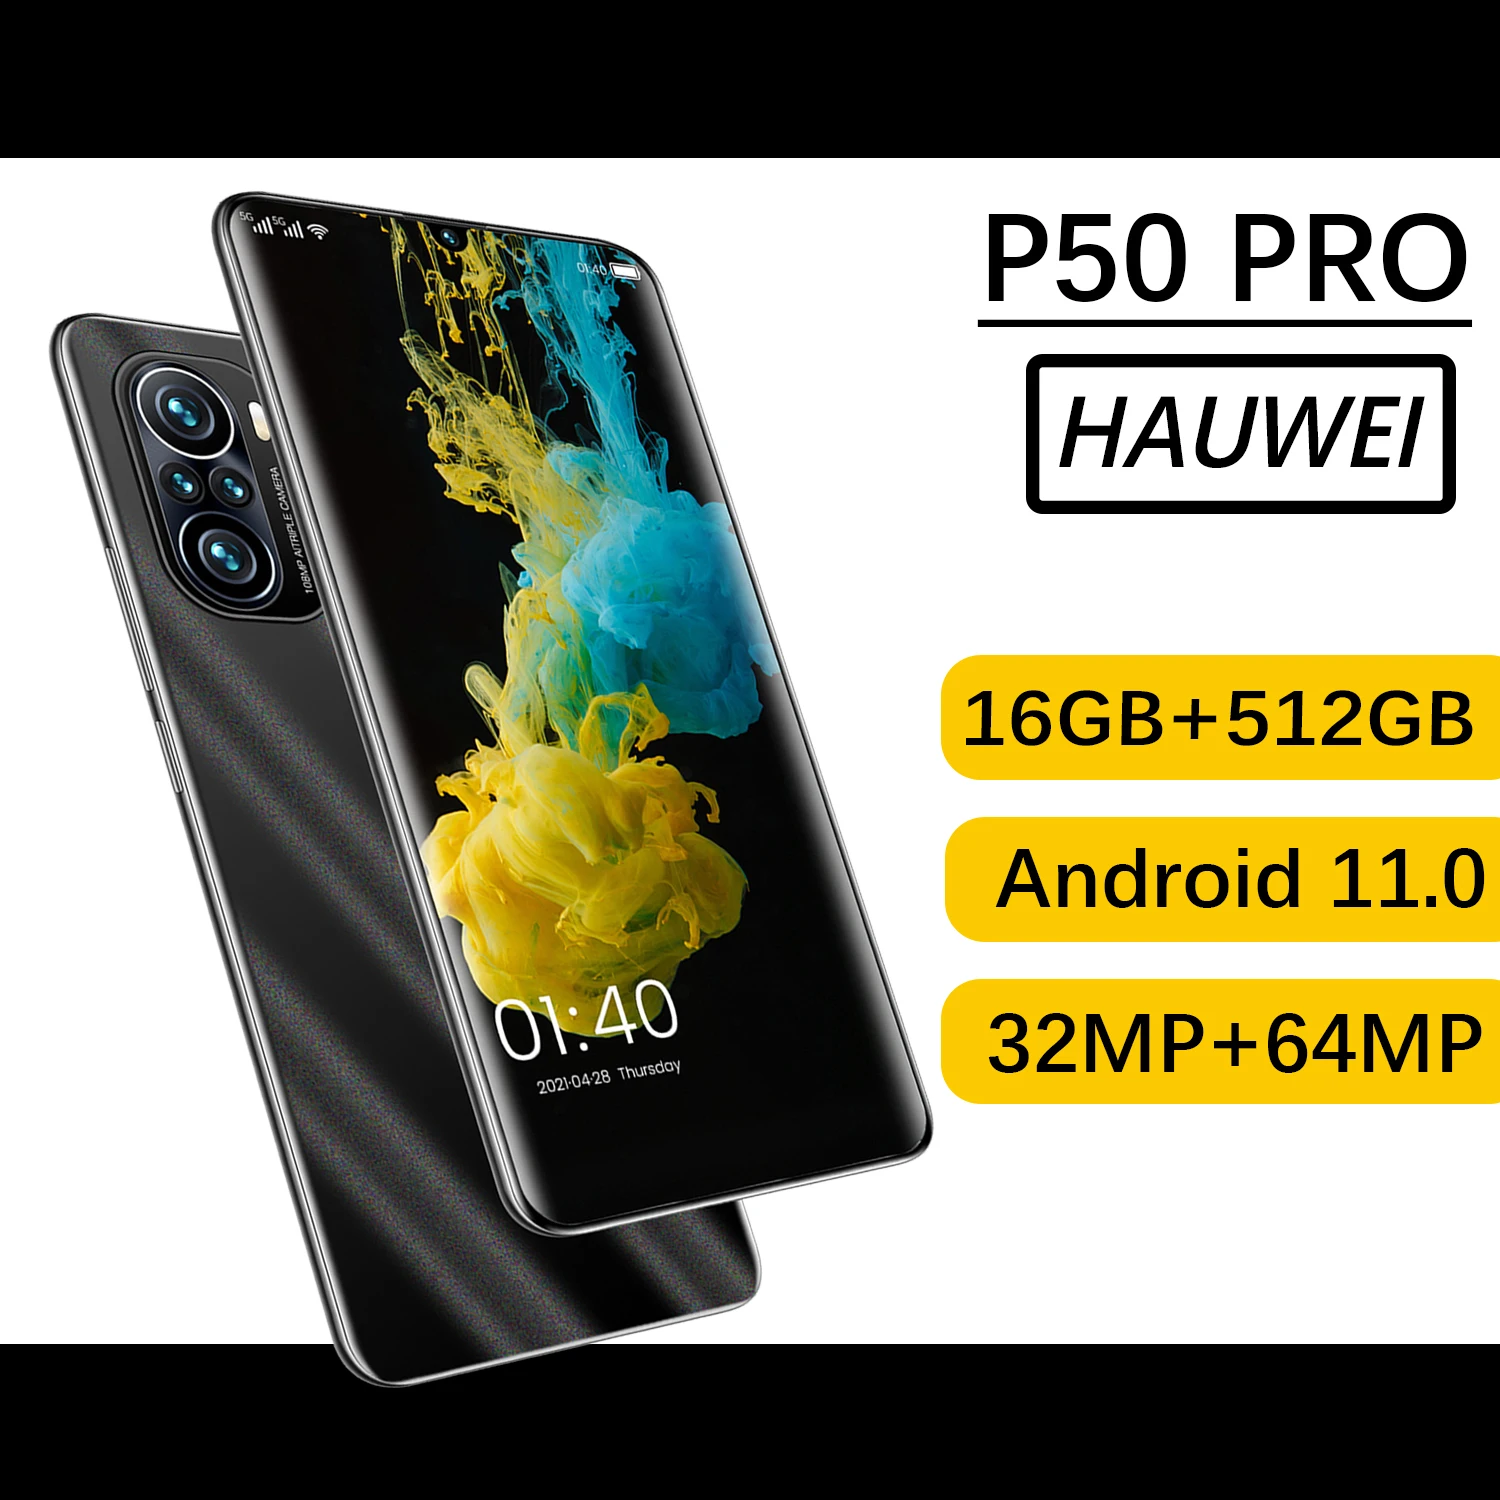 

[World premiere] P50 Pro huawei smartphone with 16GB+512GB large memory 7.0-inch screen has unlocked global version 5G smartphon